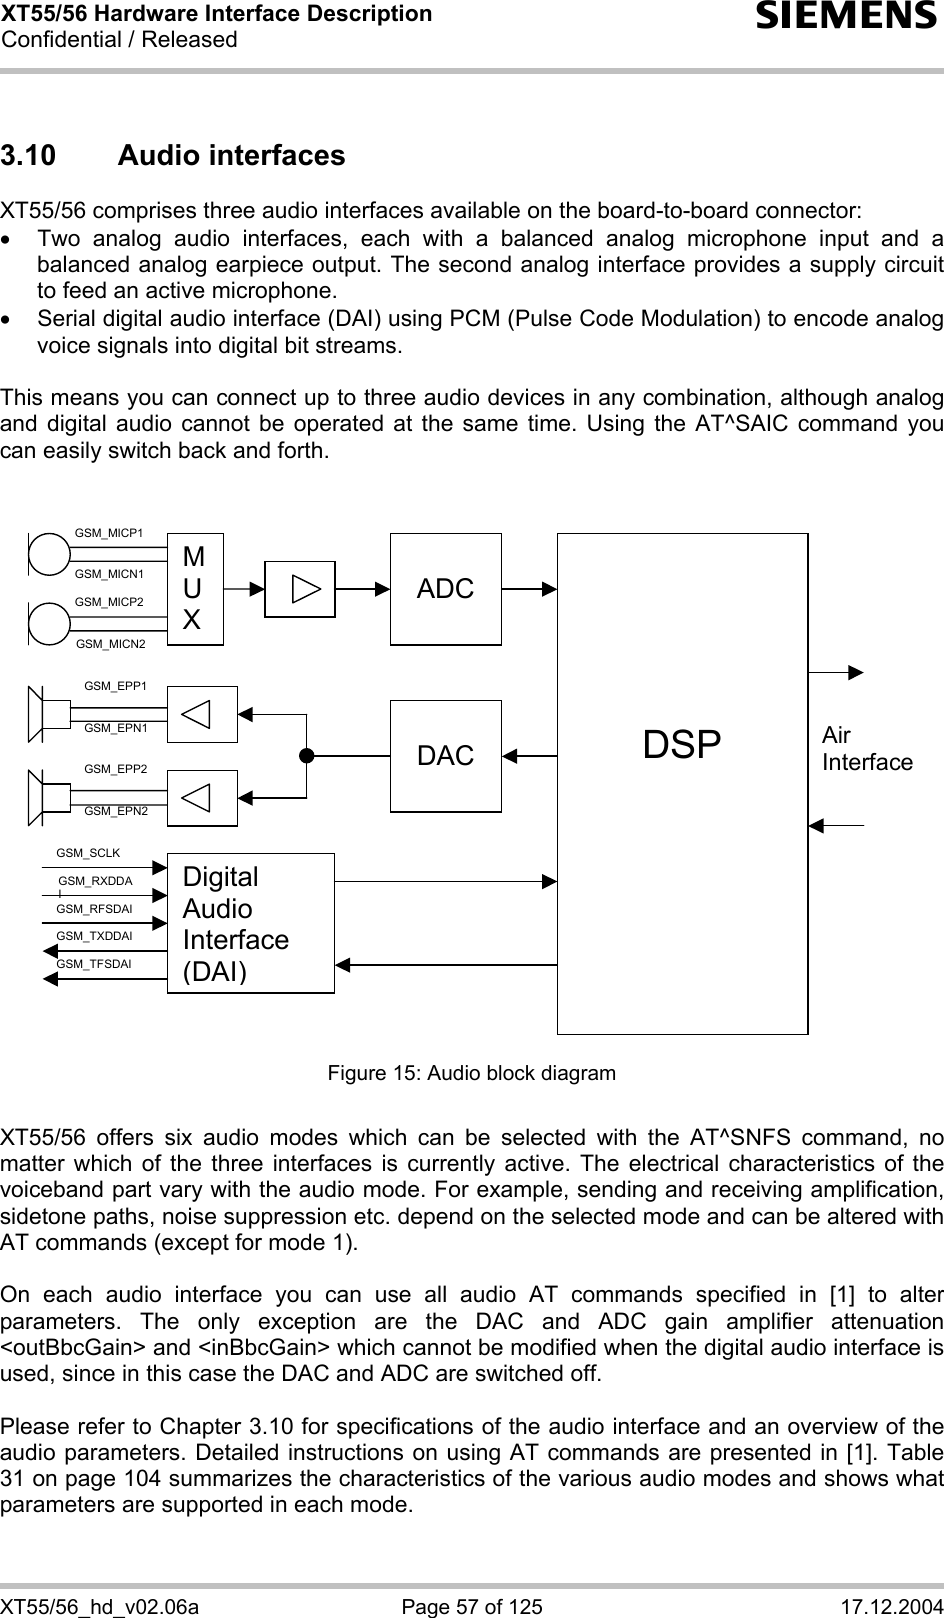 XT55/56 Hardware Interface Description Confidential / Released s XT55/56_hd_v02.06a  Page 57 of 125  17.12.2004 3.10 Audio interfaces XT55/56 comprises three audio interfaces available on the board-to-board connector:  •  Two analog audio interfaces, each with a balanced analog microphone input and a balanced analog earpiece output. The second analog interface provides a supply circuit to feed an active microphone. •  Serial digital audio interface (DAI) using PCM (Pulse Code Modulation) to encode analog voice signals into digital bit streams.  This means you can connect up to three audio devices in any combination, although analog and digital audio cannot be operated at the same time. Using the AT^SAIC command you can easily switch back and forth.    M U X  ADC     DSP  DAC Air InterfaceDigital Audio Interface (DAI)      GSM_MICP1      GSM_MICN1      GSM_MICP2 GSM_MICN2 GSM_EPP1 GSM_EPN1 GSM_EPP2 GSM_EPN2 GSM_SCLK GSM_RXDDAI GSM_TFSDAI GSM_RFSDAI GSM_TXDDAI  Figure 15: Audio block diagram  XT55/56 offers six audio modes which can be selected with the AT^SNFS command, no matter which of the three interfaces is currently active. The electrical characteristics of the voiceband part vary with the audio mode. For example, sending and receiving amplification, sidetone paths, noise suppression etc. depend on the selected mode and can be altered with AT commands (except for mode 1).  On each audio interface you can use all audio AT commands specified in [1] to alter parameters. The only exception are the DAC and ADC gain amplifier attenuation &lt;outBbcGain&gt; and &lt;inBbcGain&gt; which cannot be modified when the digital audio interface is used, since in this case the DAC and ADC are switched off.  Please refer to Chapter 3.10 for specifications of the audio interface and an overview of the audio parameters. Detailed instructions on using AT commands are presented in [1]. Table 31 on page 104 summarizes the characteristics of the various audio modes and shows what parameters are supported in each mode. 